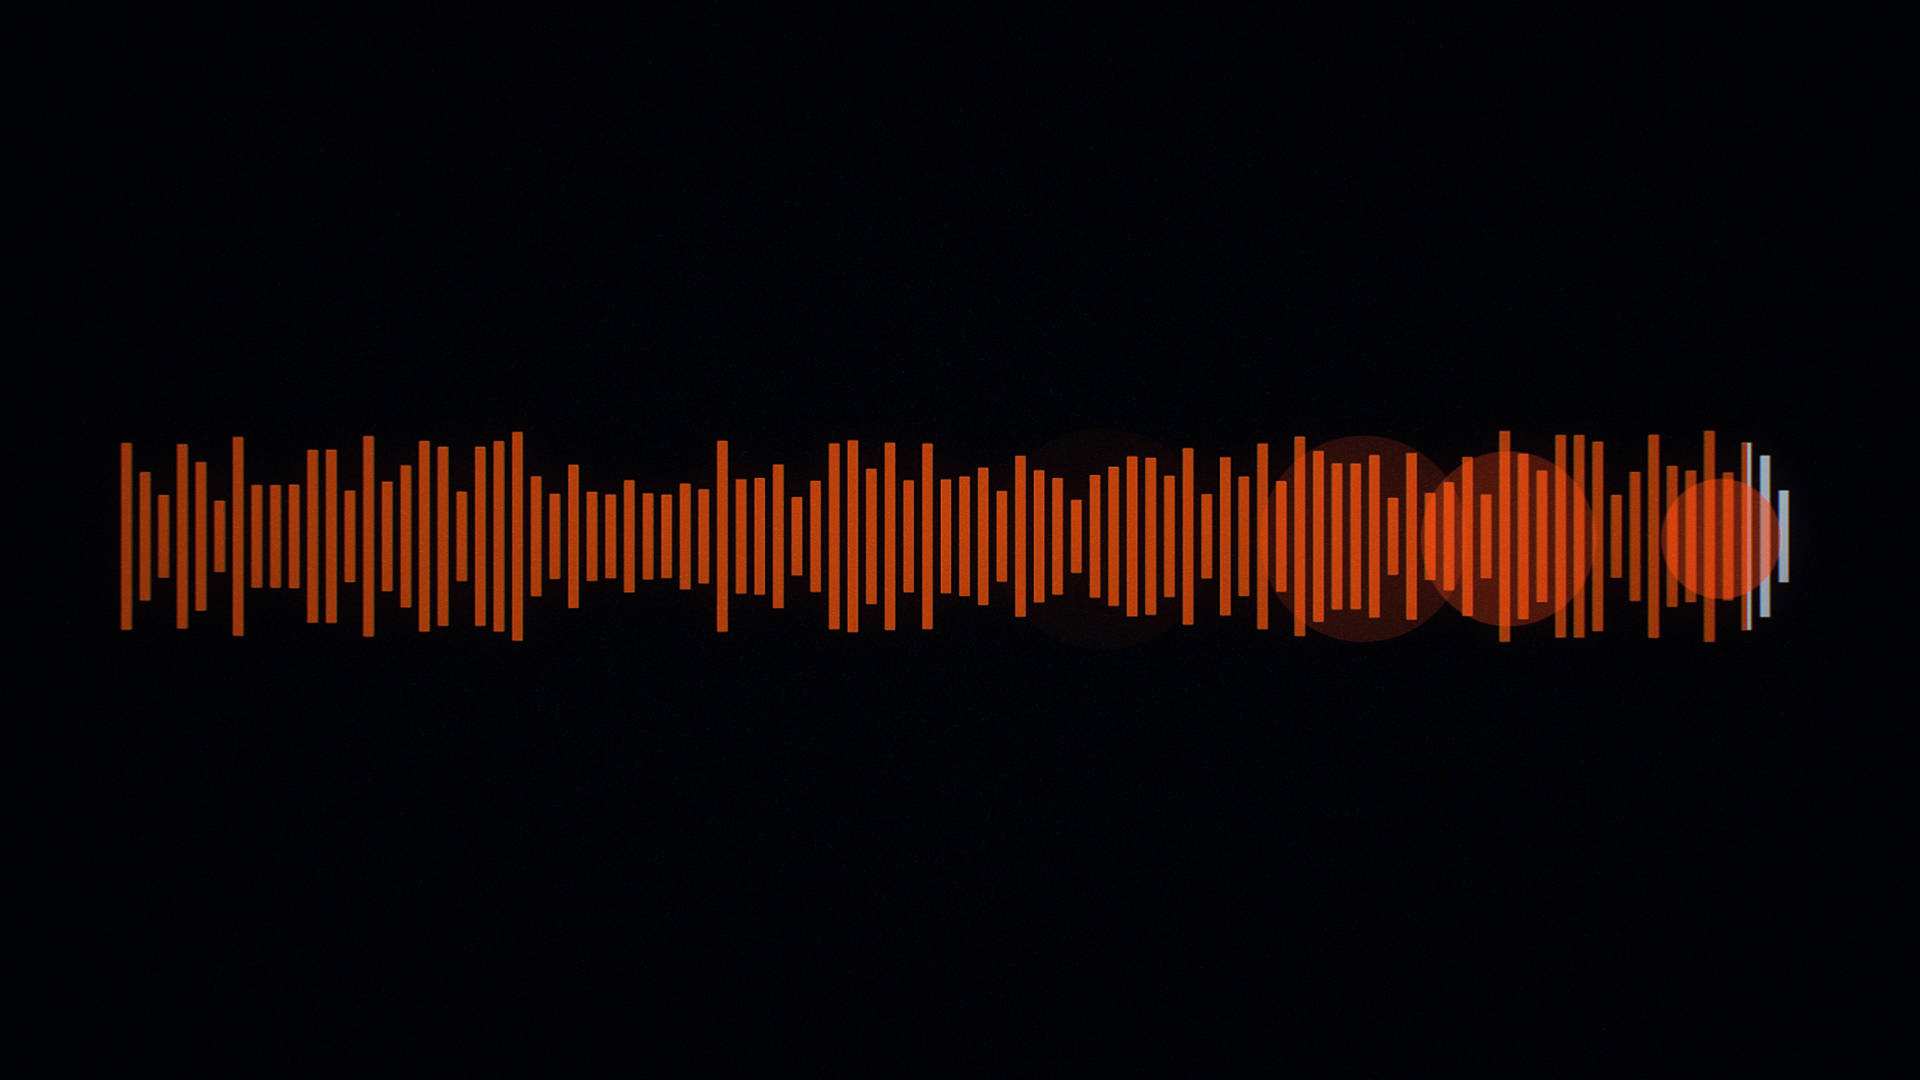 Soundcloud Audio Streaming Bars Background